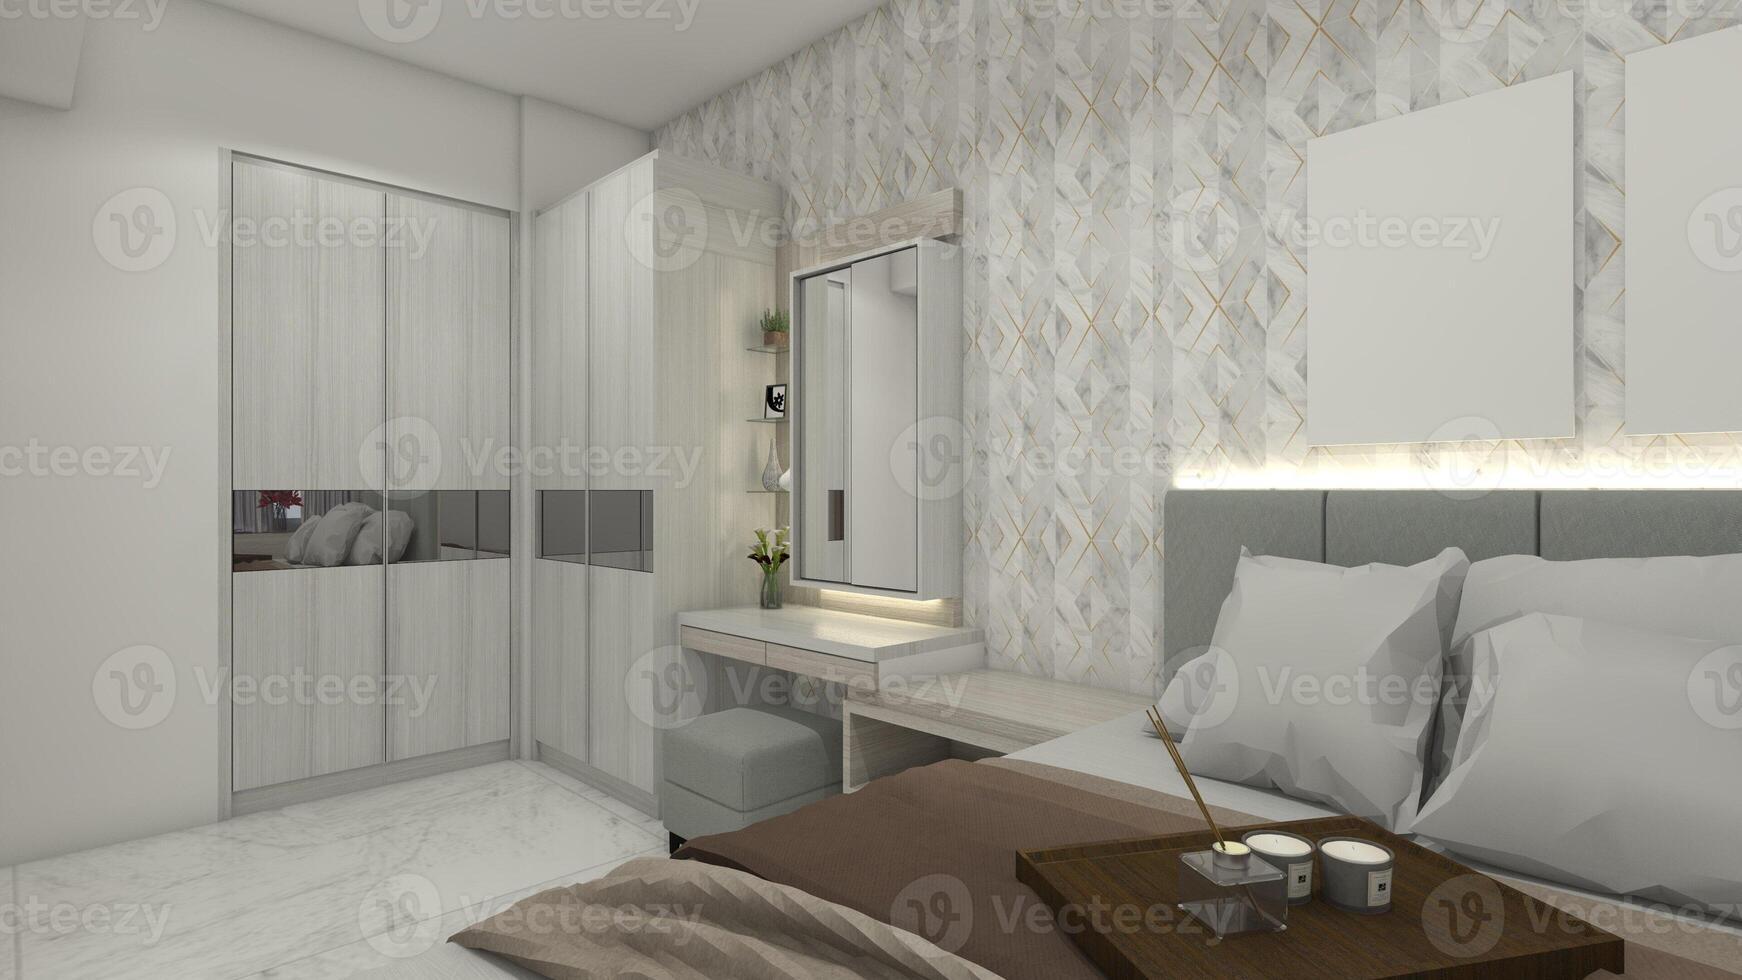 Minimalist and Modern Bedroom Design with Clothes Wardrobe and Dressing Table, 3D Illustration photo